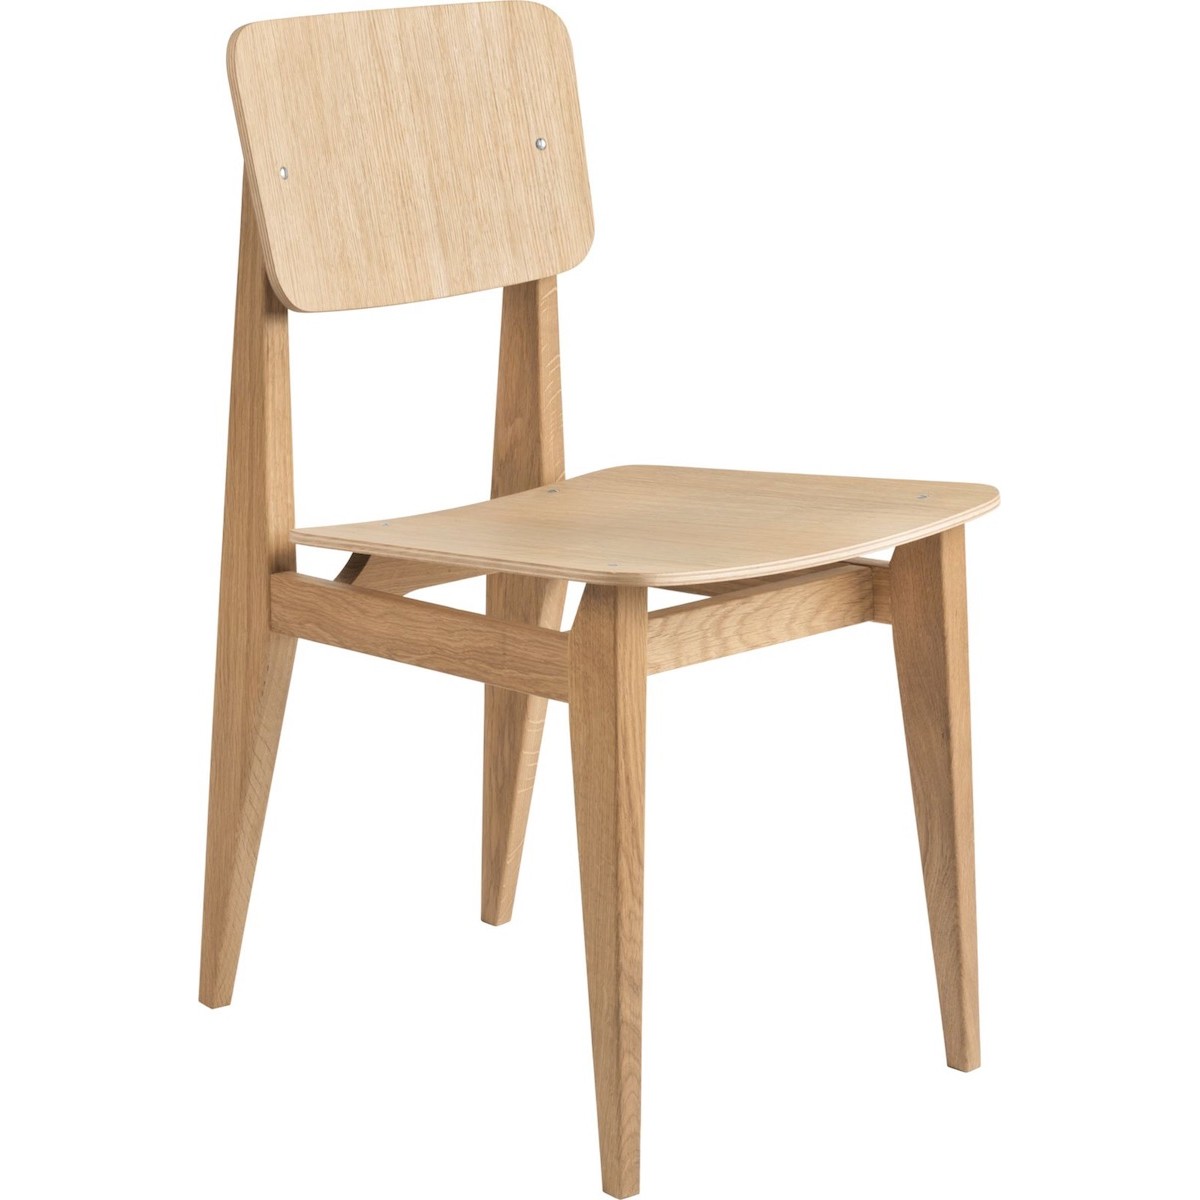 Oiled Oak, wooden seat & back – C-Chair